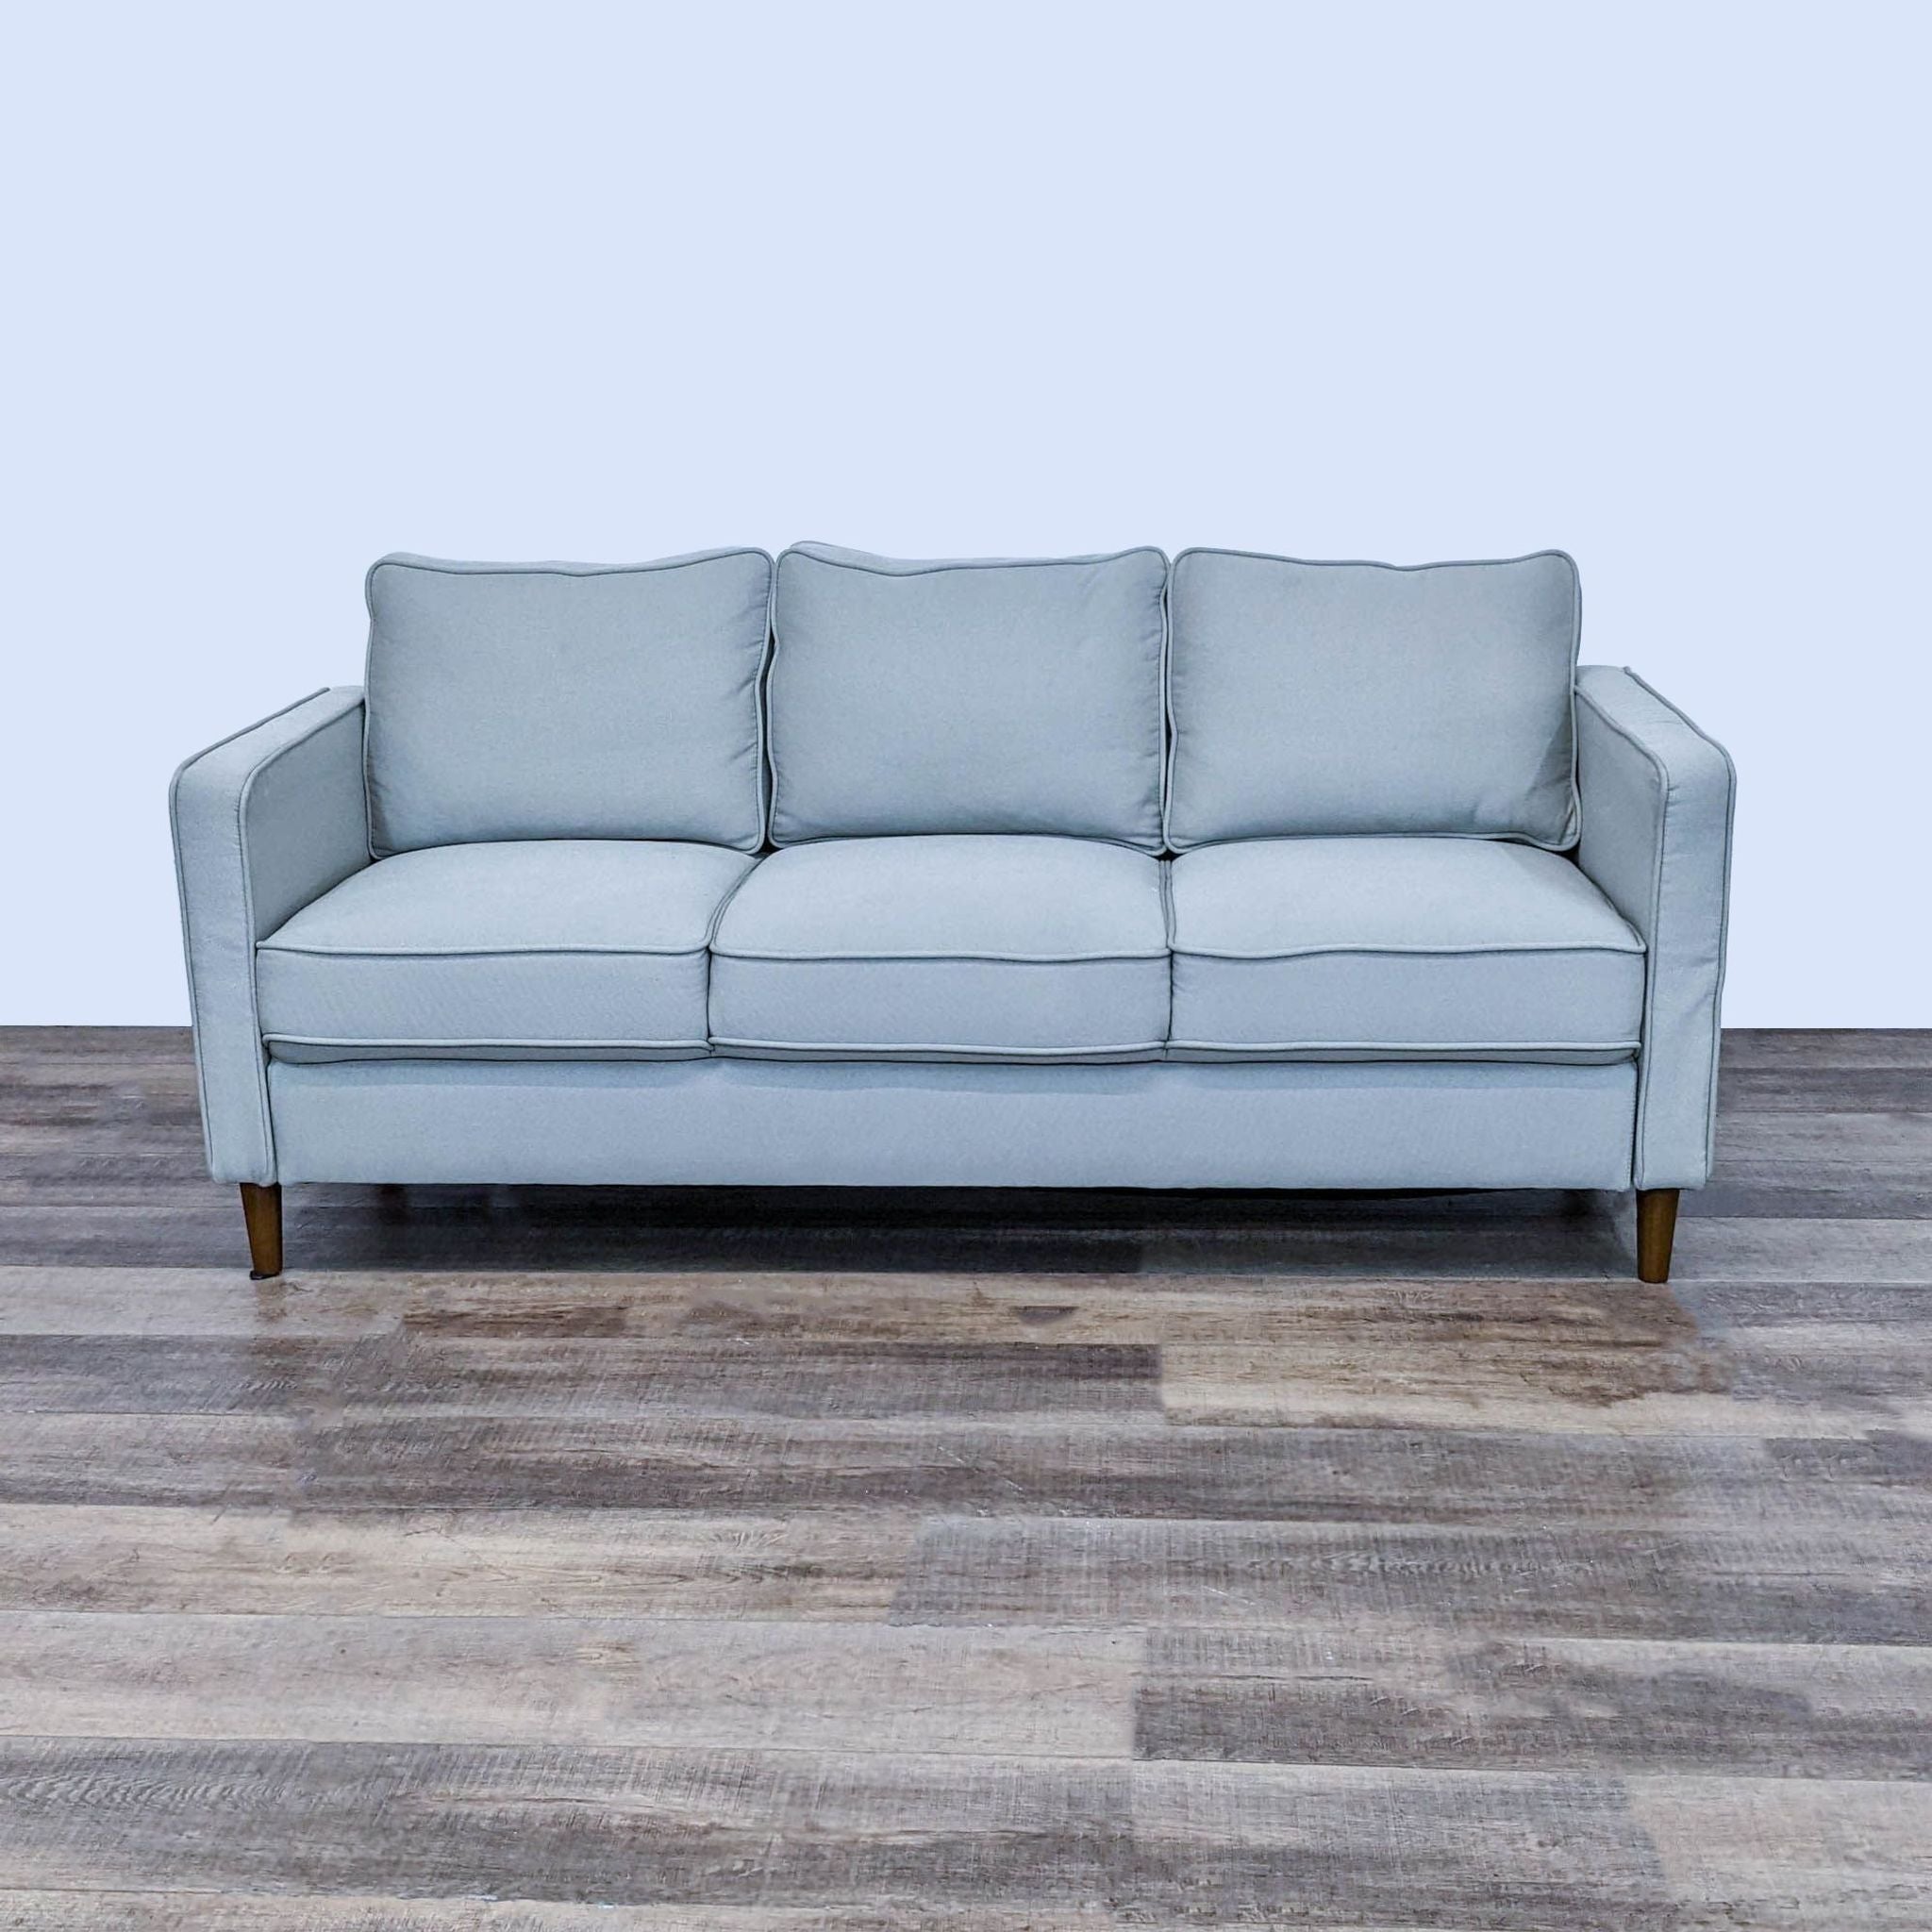 Reperch brand 3-seat sofa with gray upholstery and narrow wooden legs, against a wooden floor background.